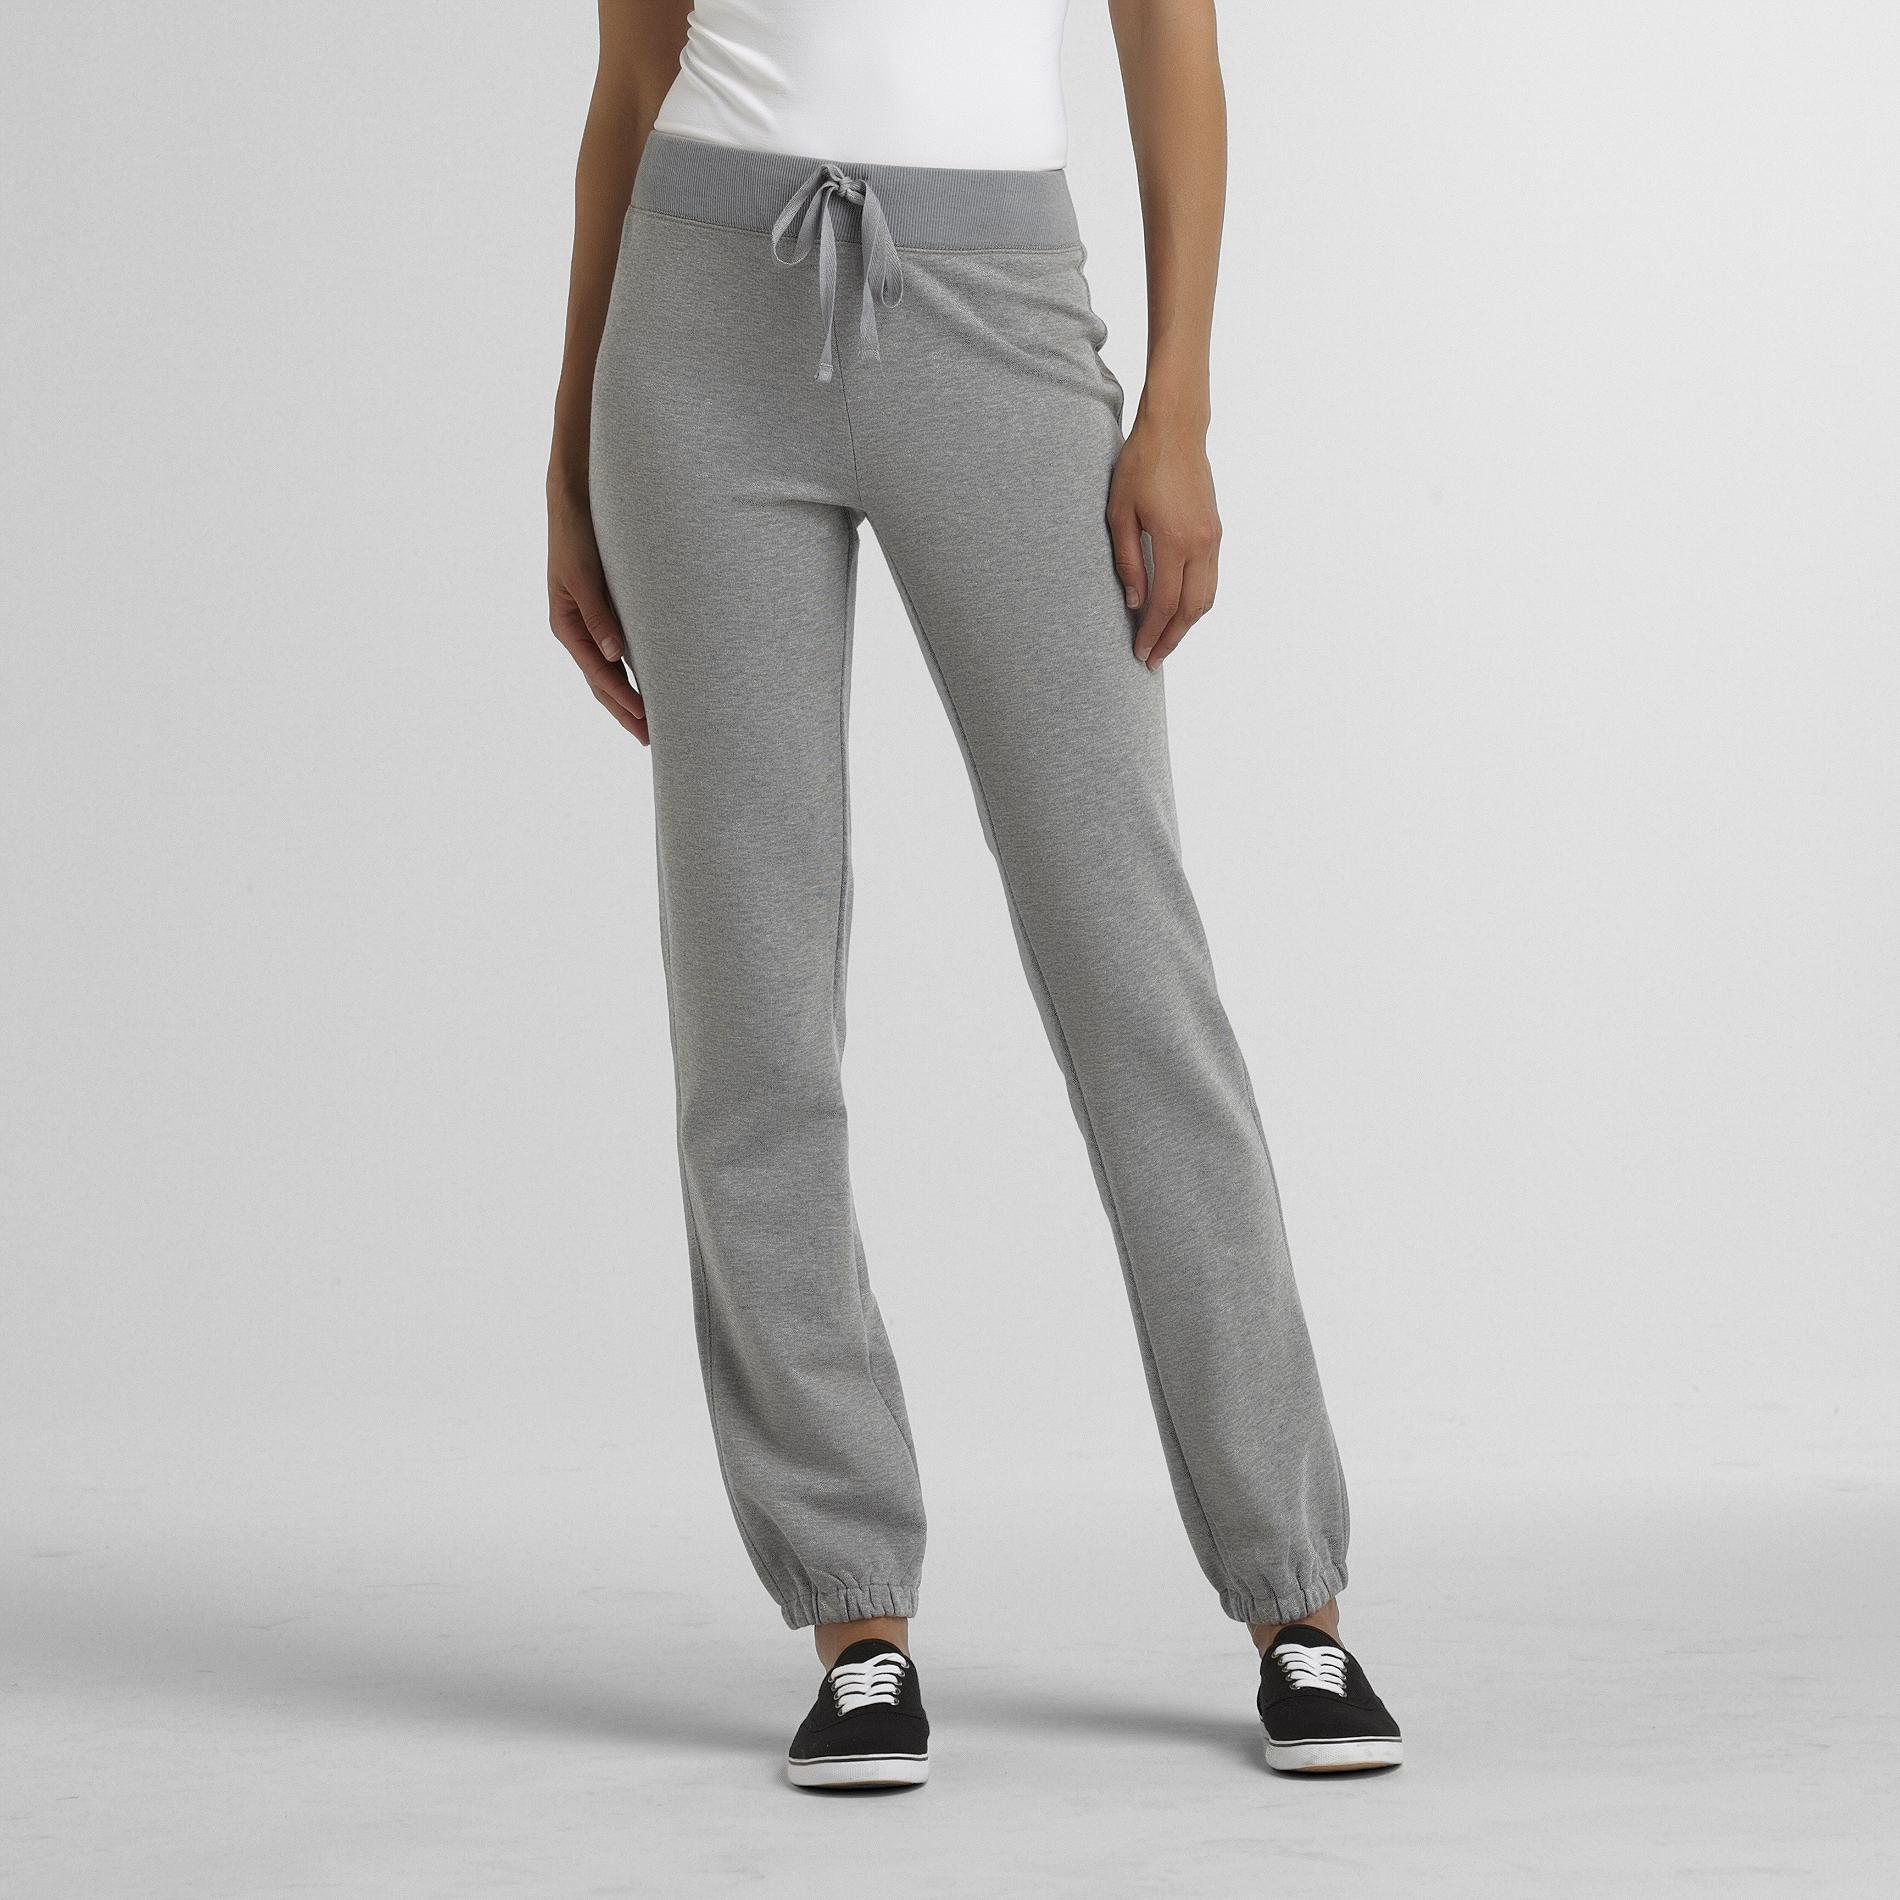 Route 66 Women's Skinny Track Pants